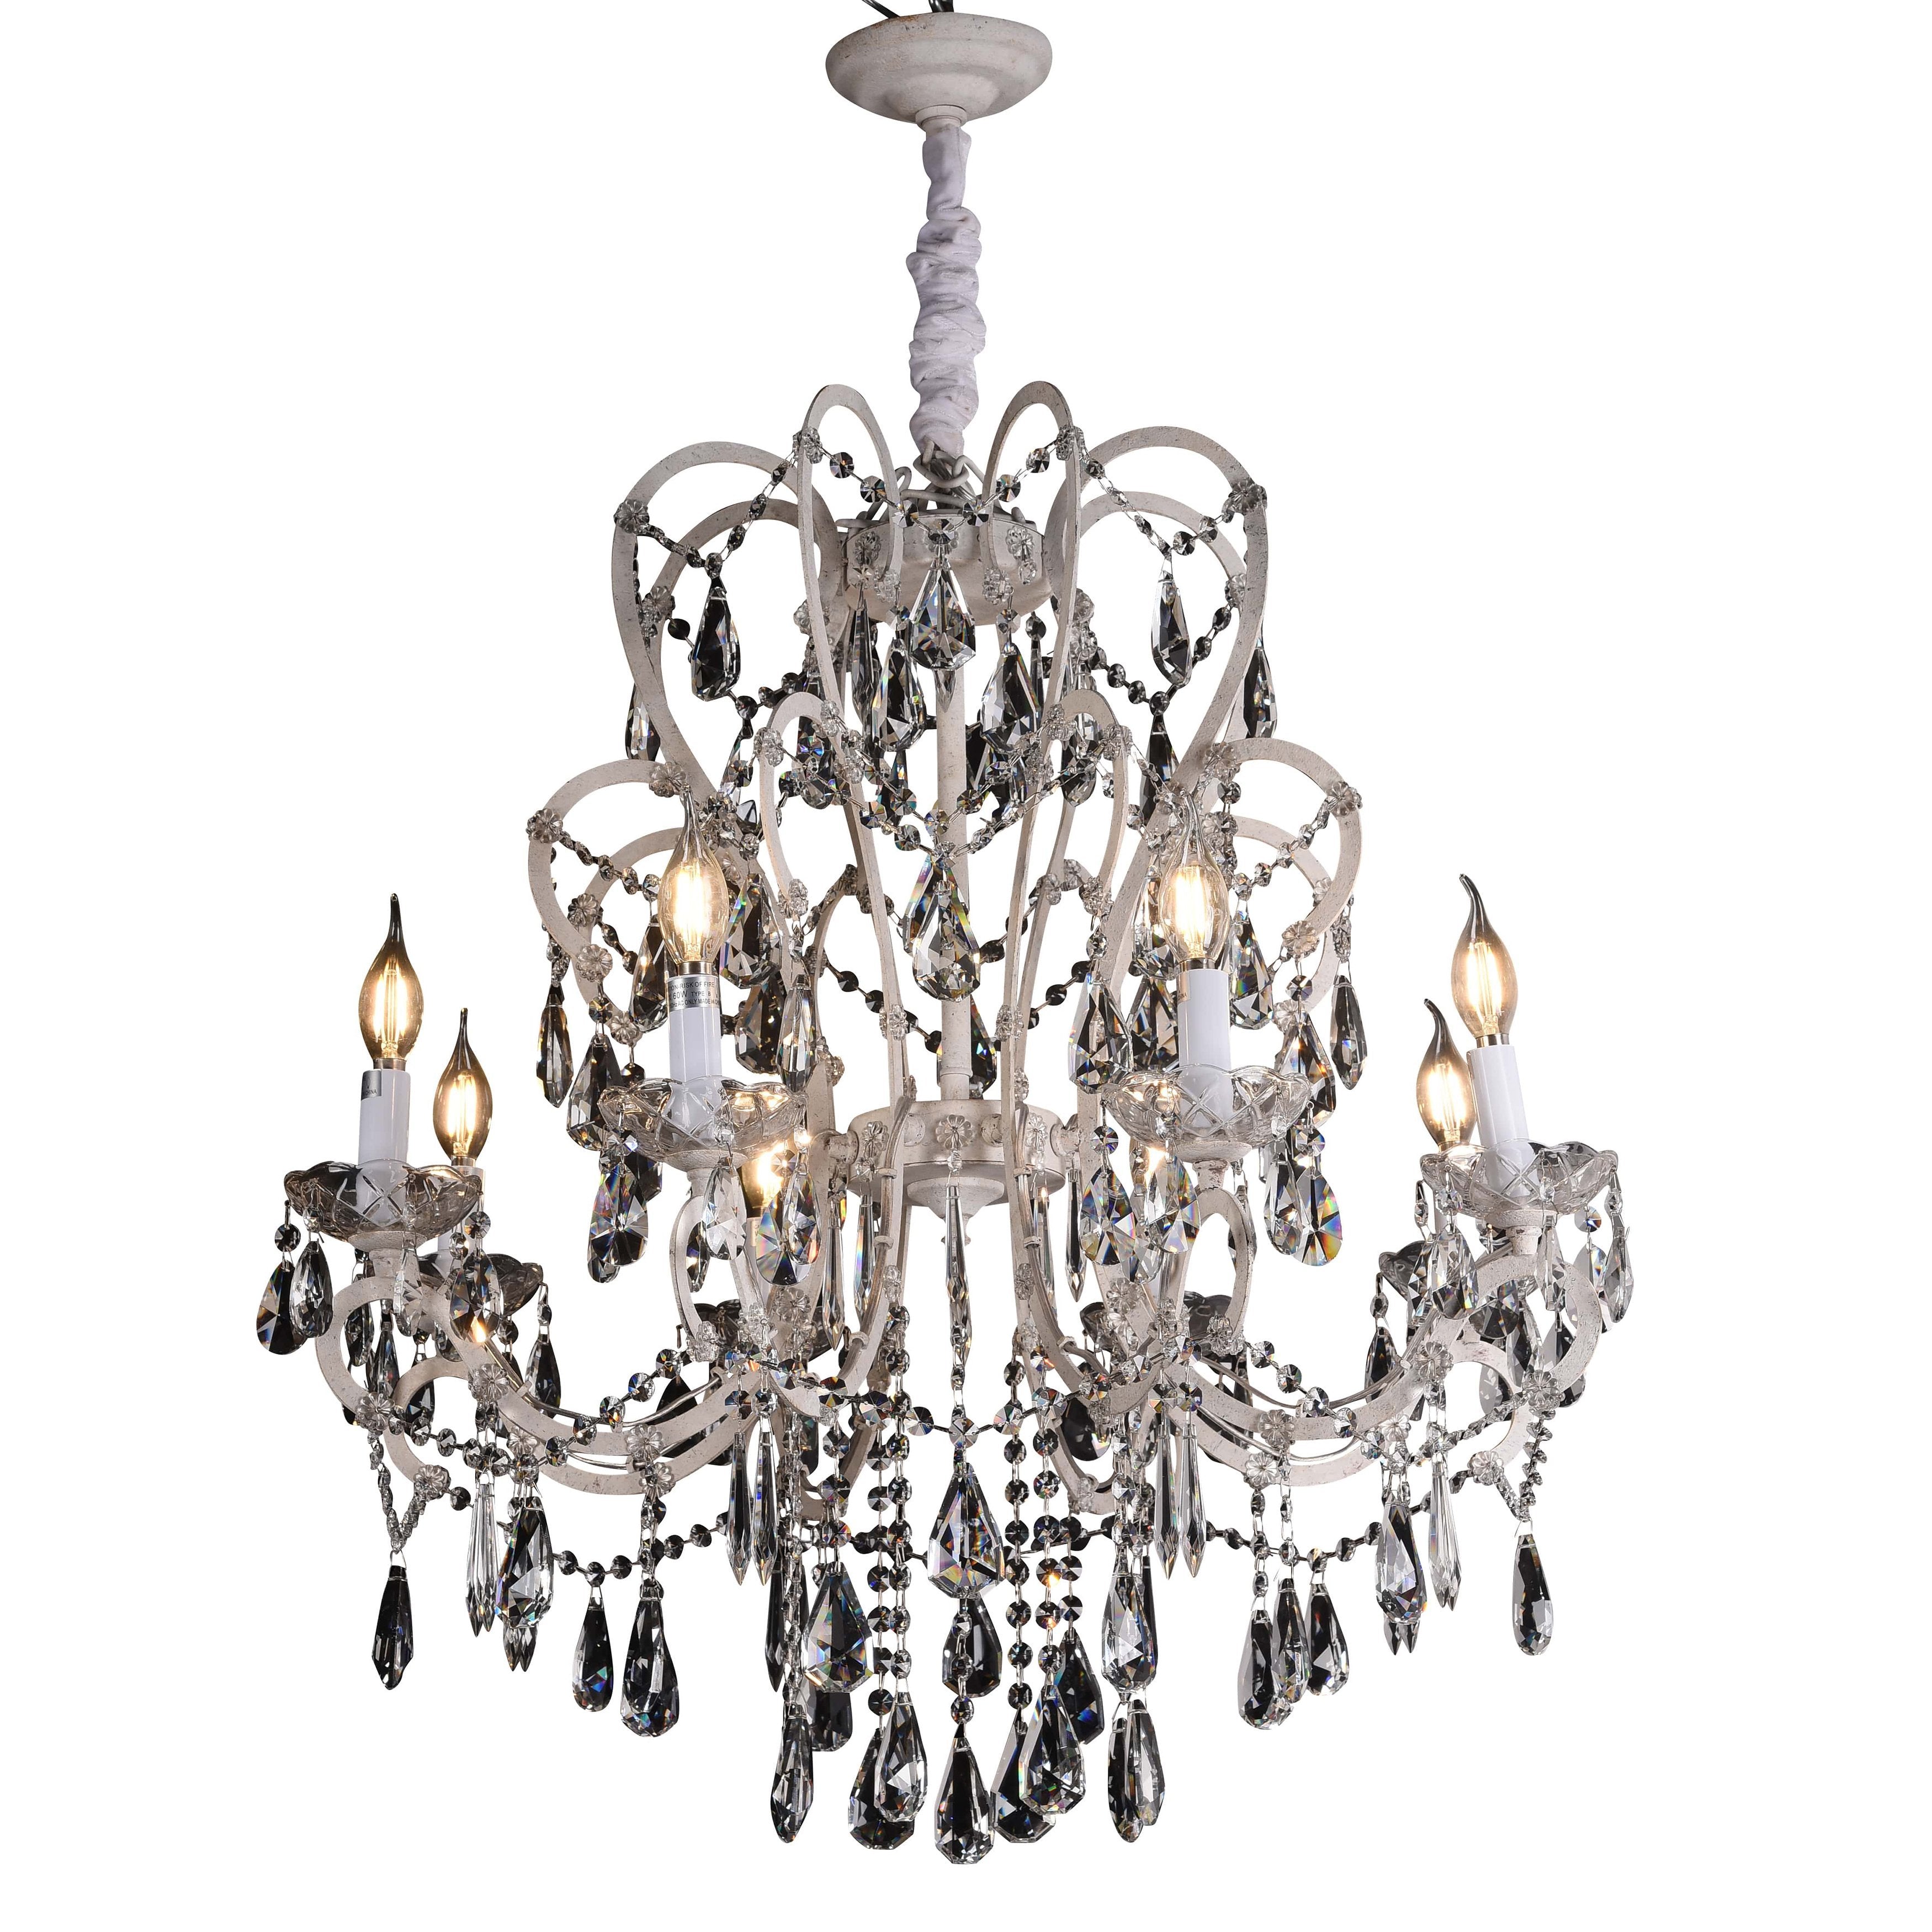 Anabelle Rococo Crystal Chandelier - Italian Concept - Size